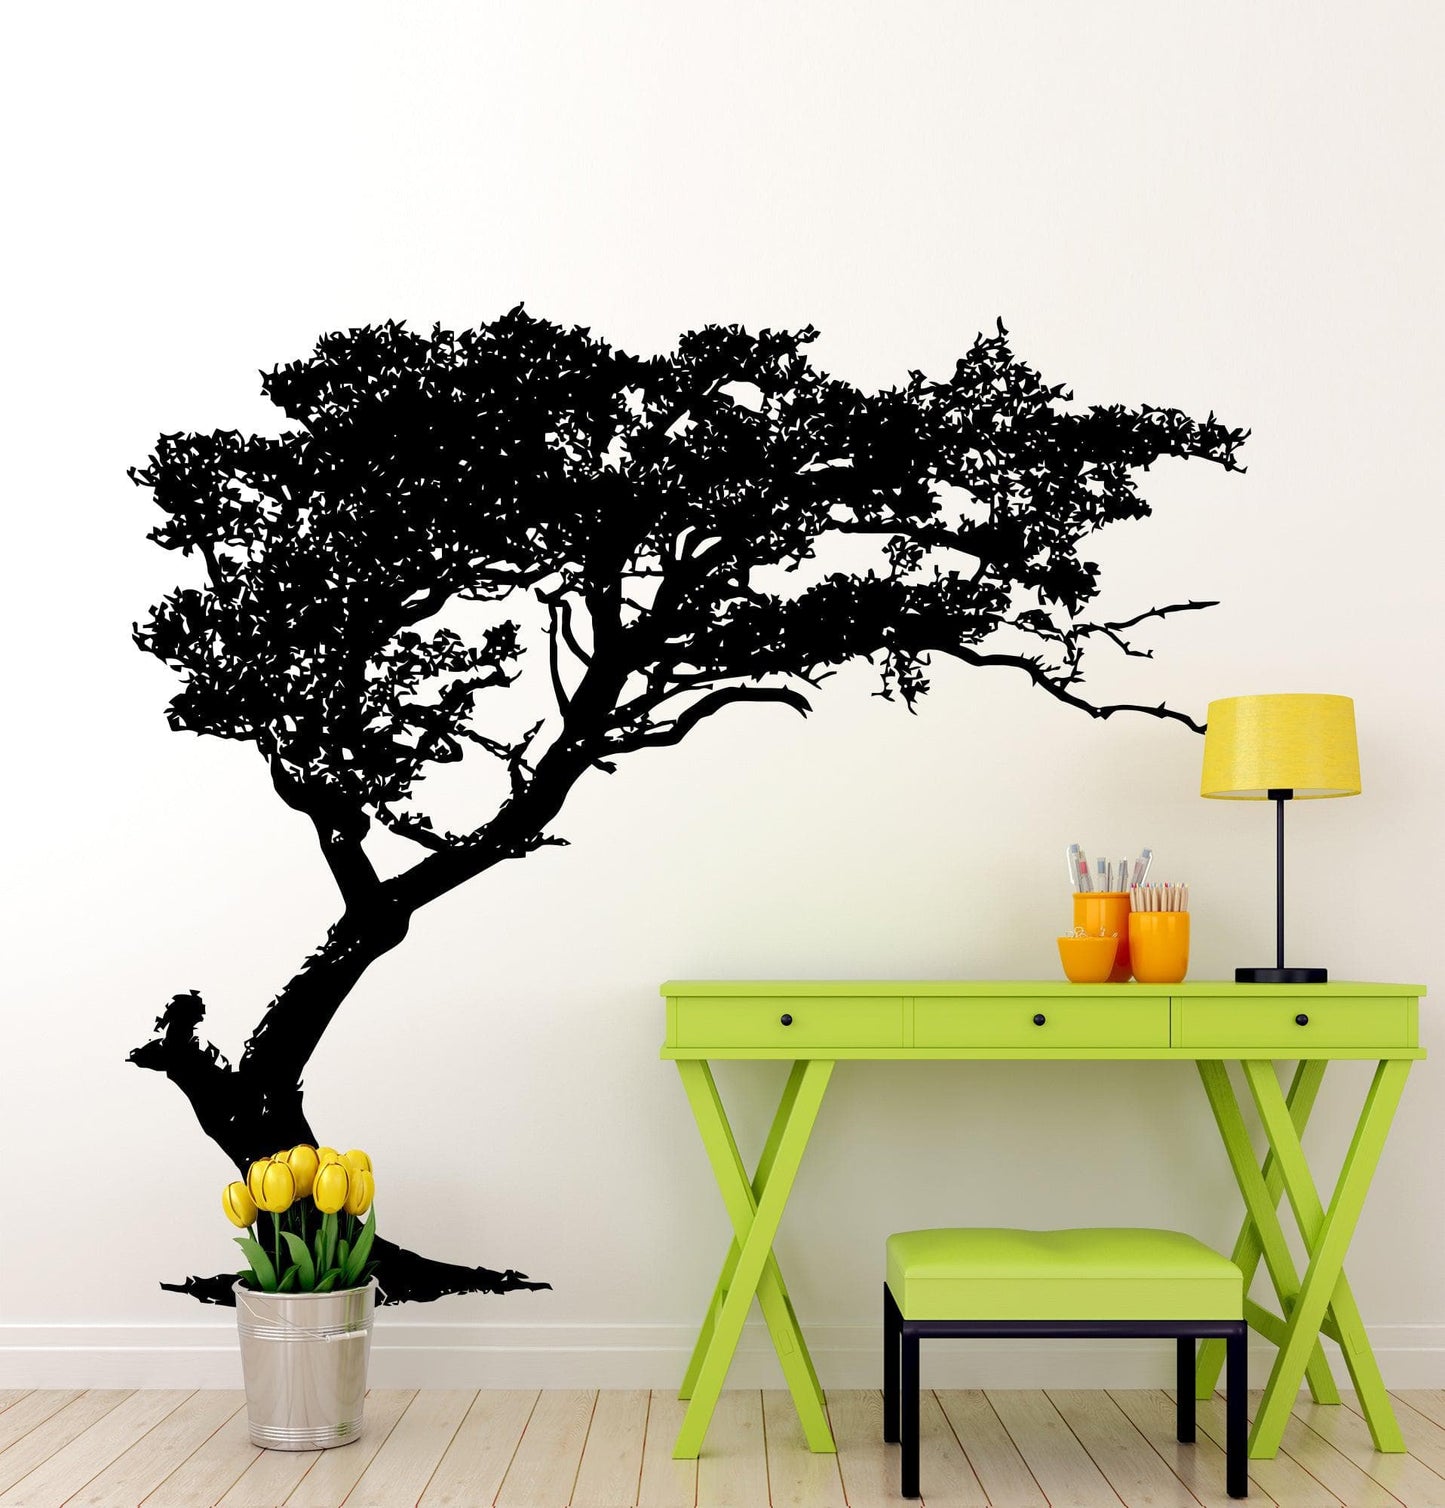 Black tree decal on a white wall next to a yellow desk and chair.